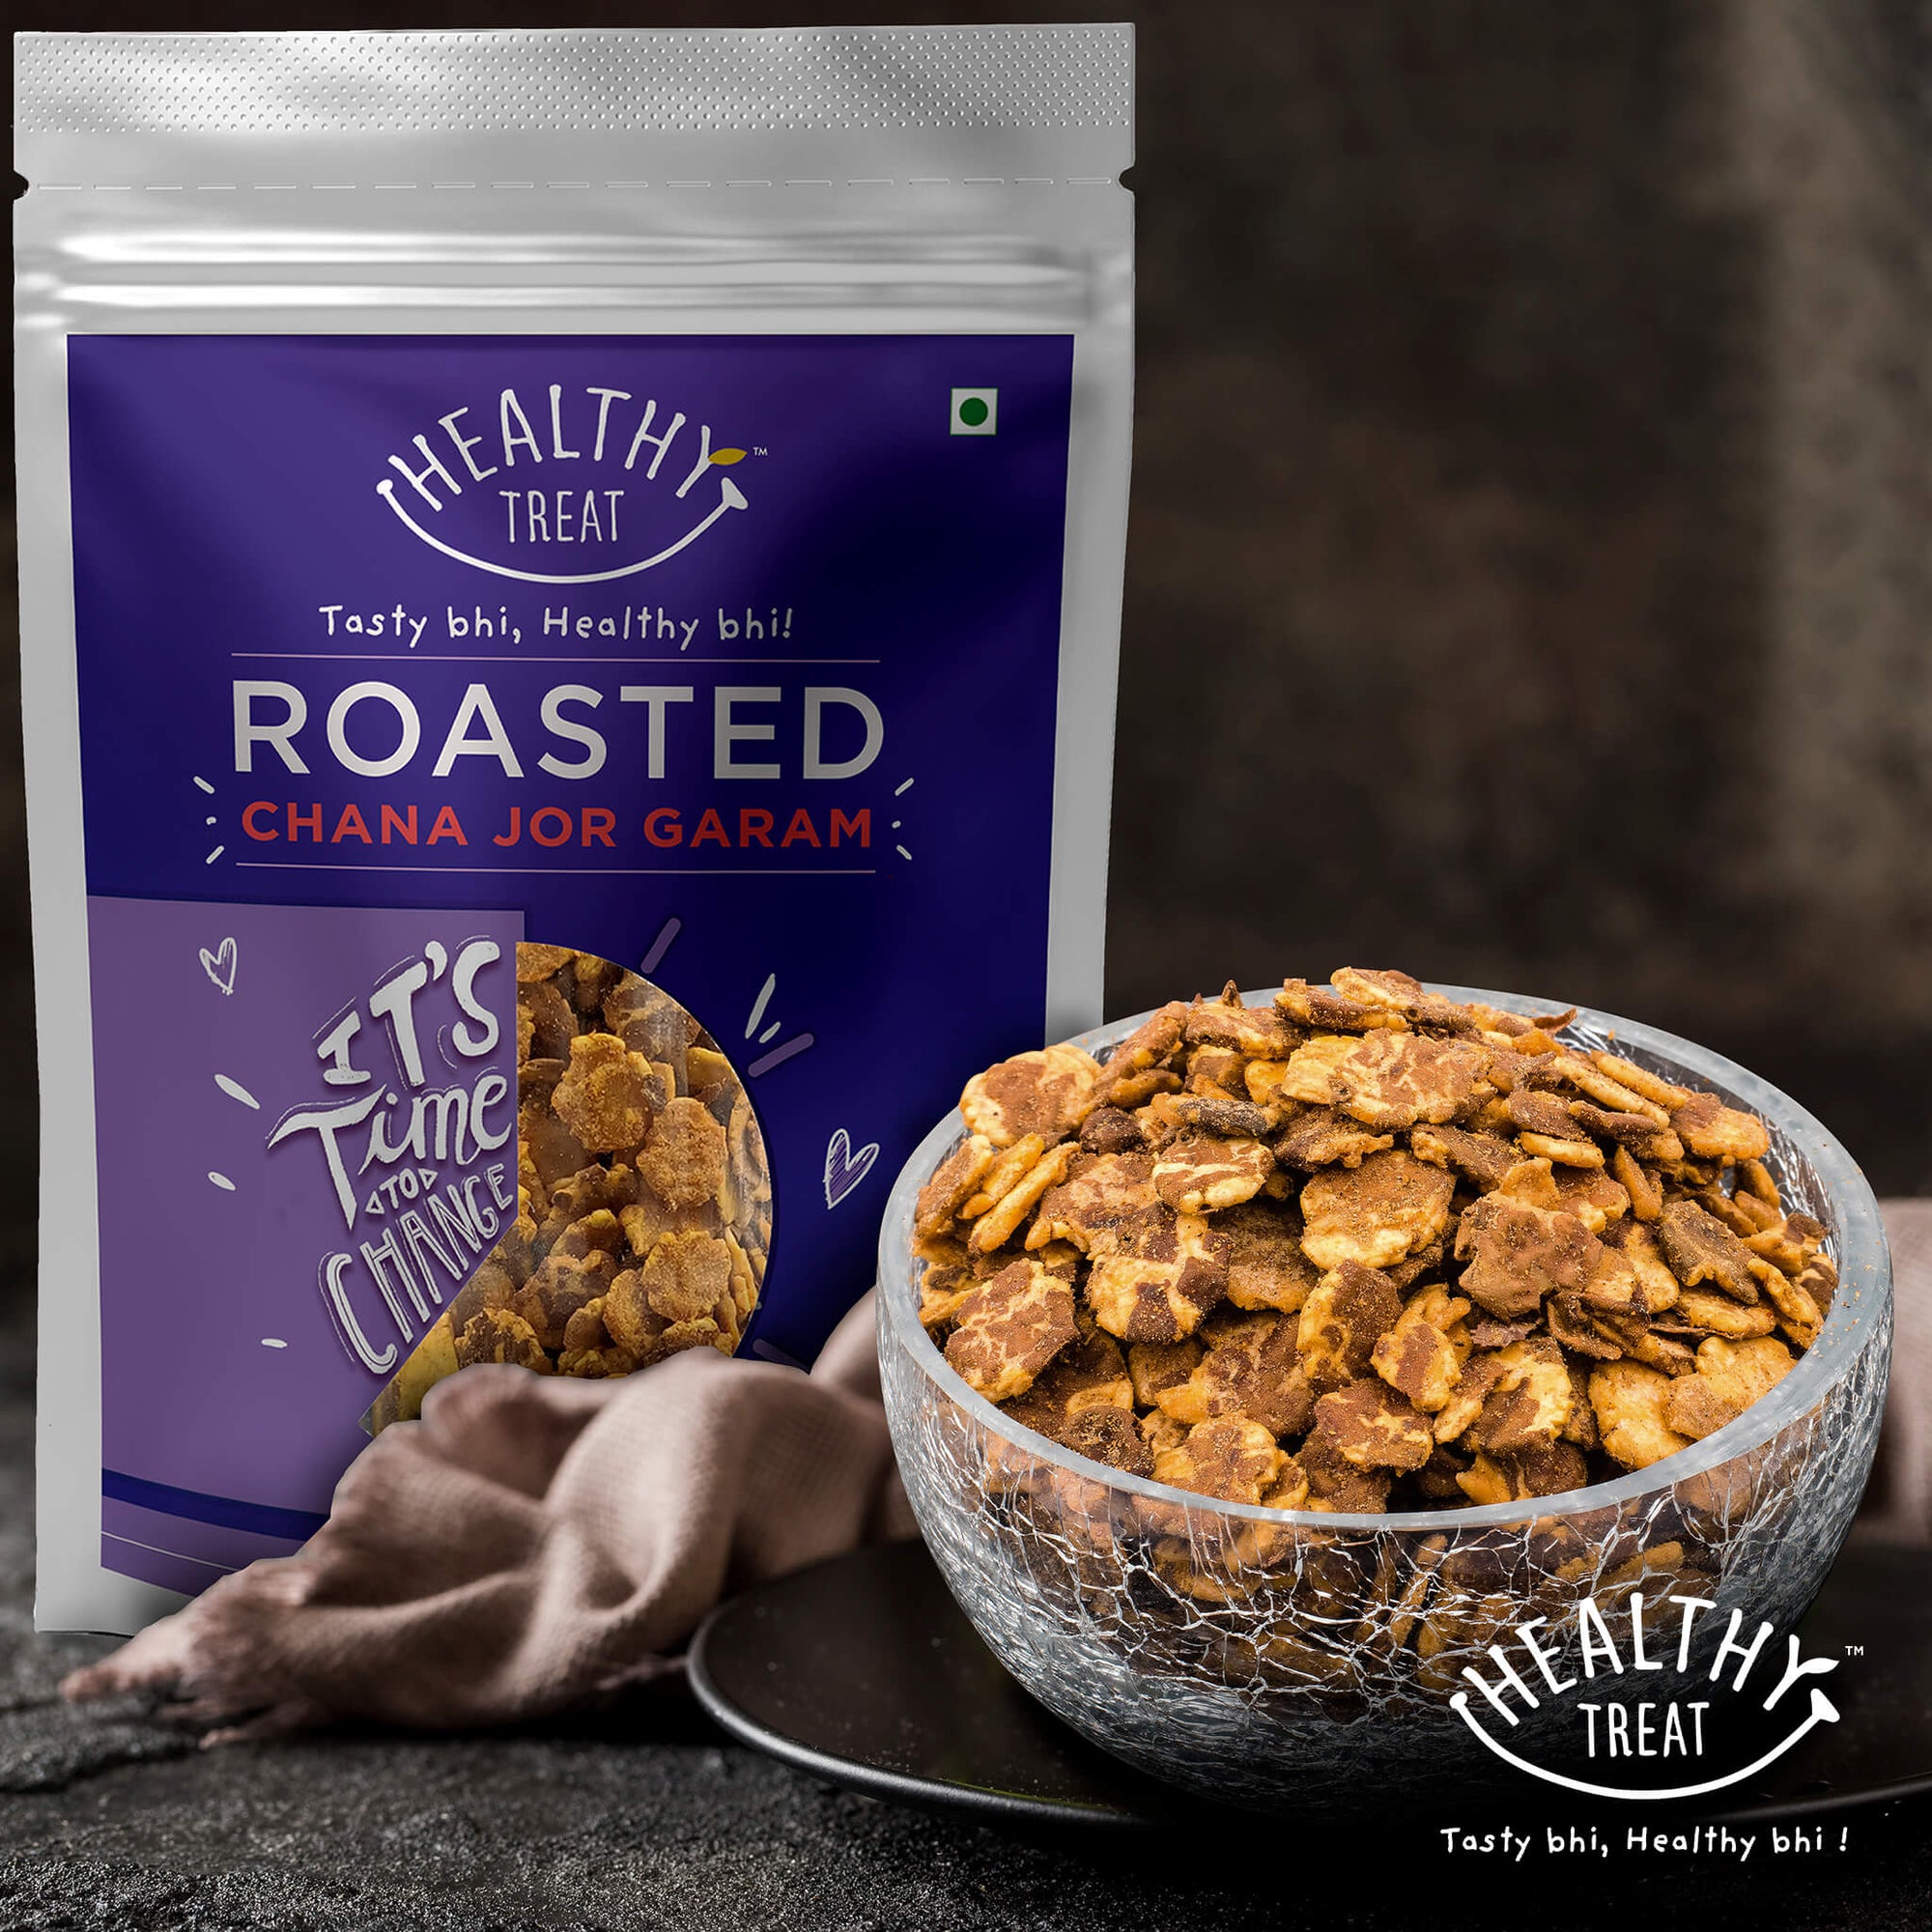 roasted chana jor garam, flattened chickpeas, by healthy treat, crunchy and protein rich